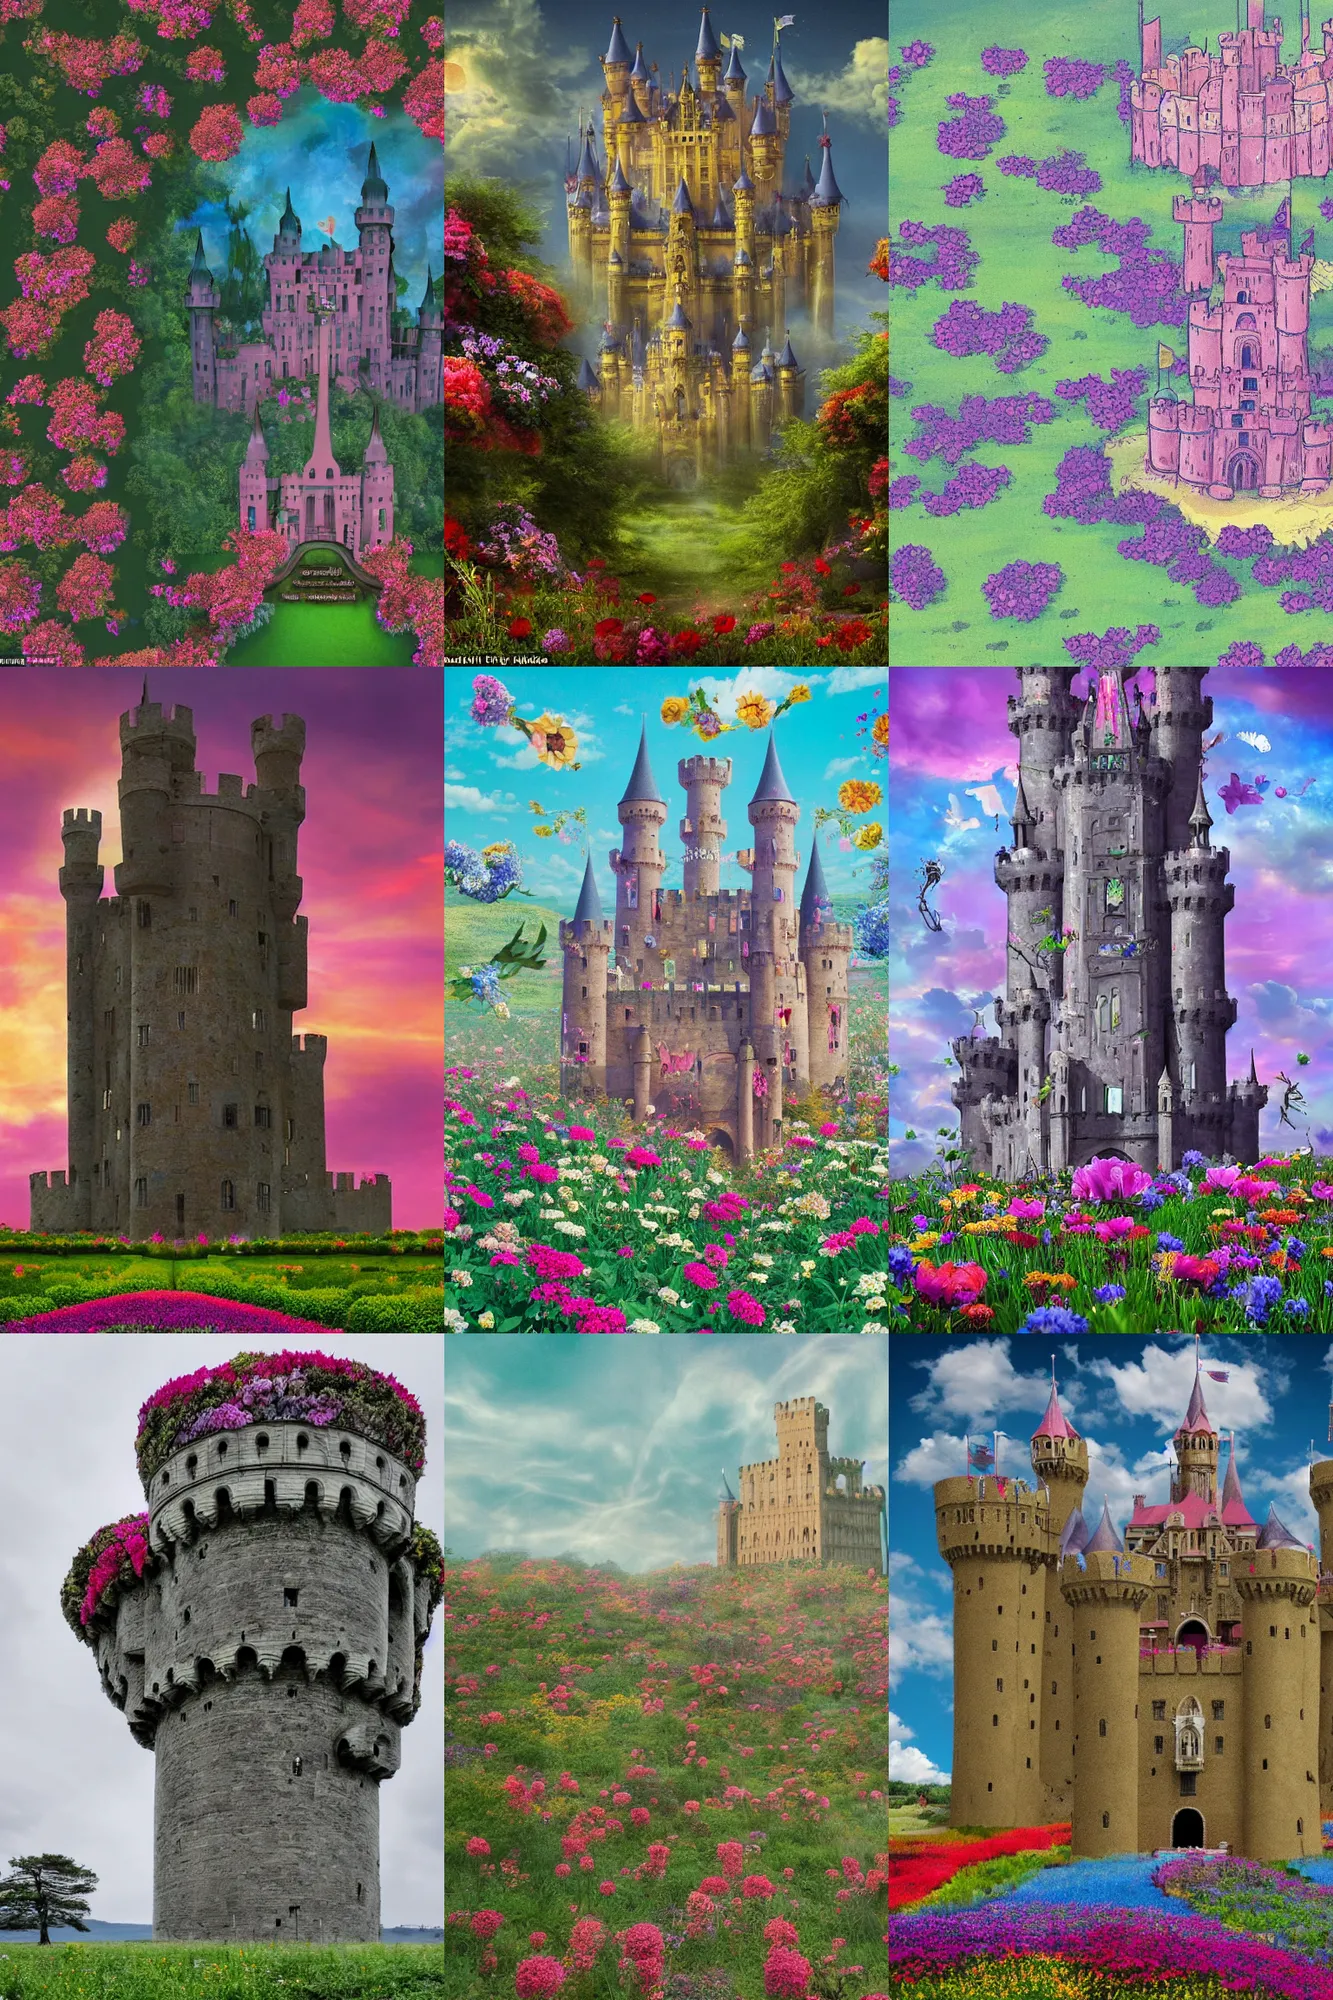 Prompt: A very phantasmagoric and ominous tall castle stands in the middle of an plain covered with colorful flowers